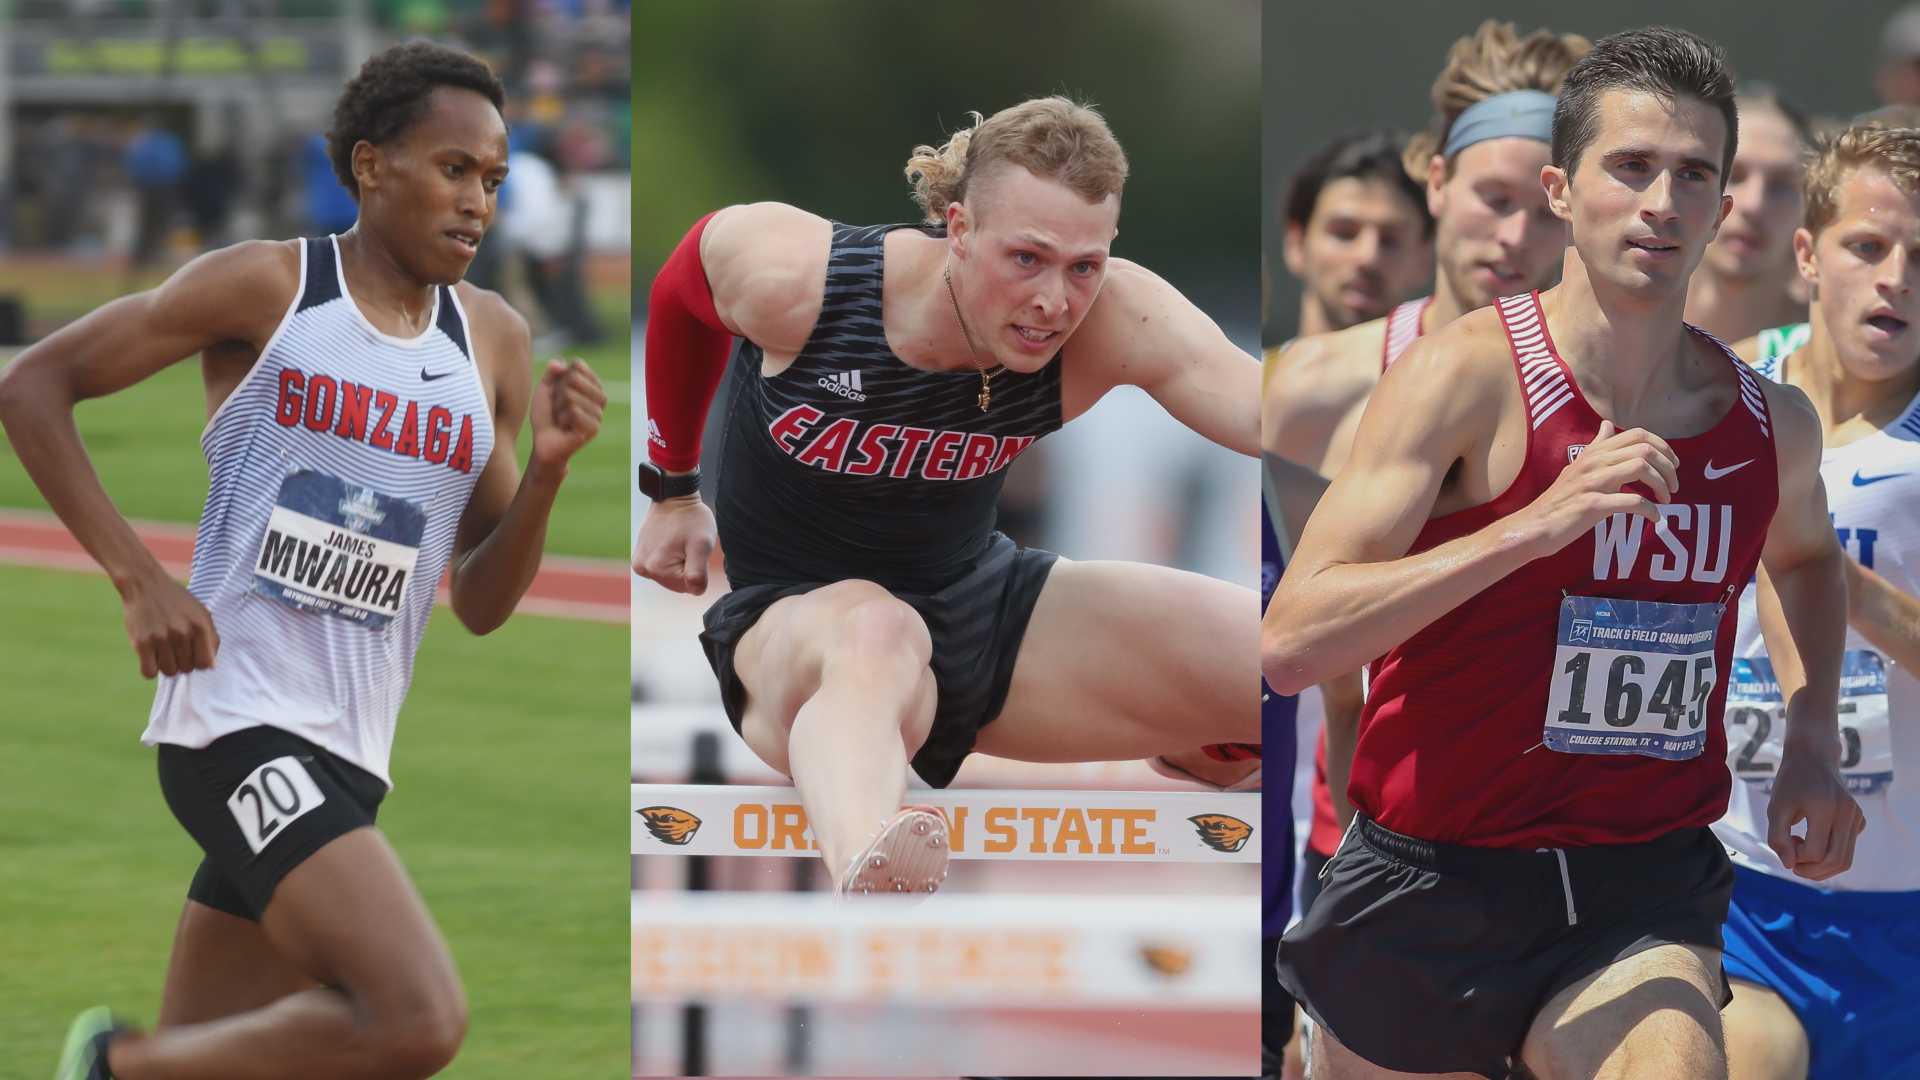 Gonzaga's James Mwaura, Washington State's Paul Ryan and Eastern Washington's Parker Bowden will compete in Eugene between June 18-27.